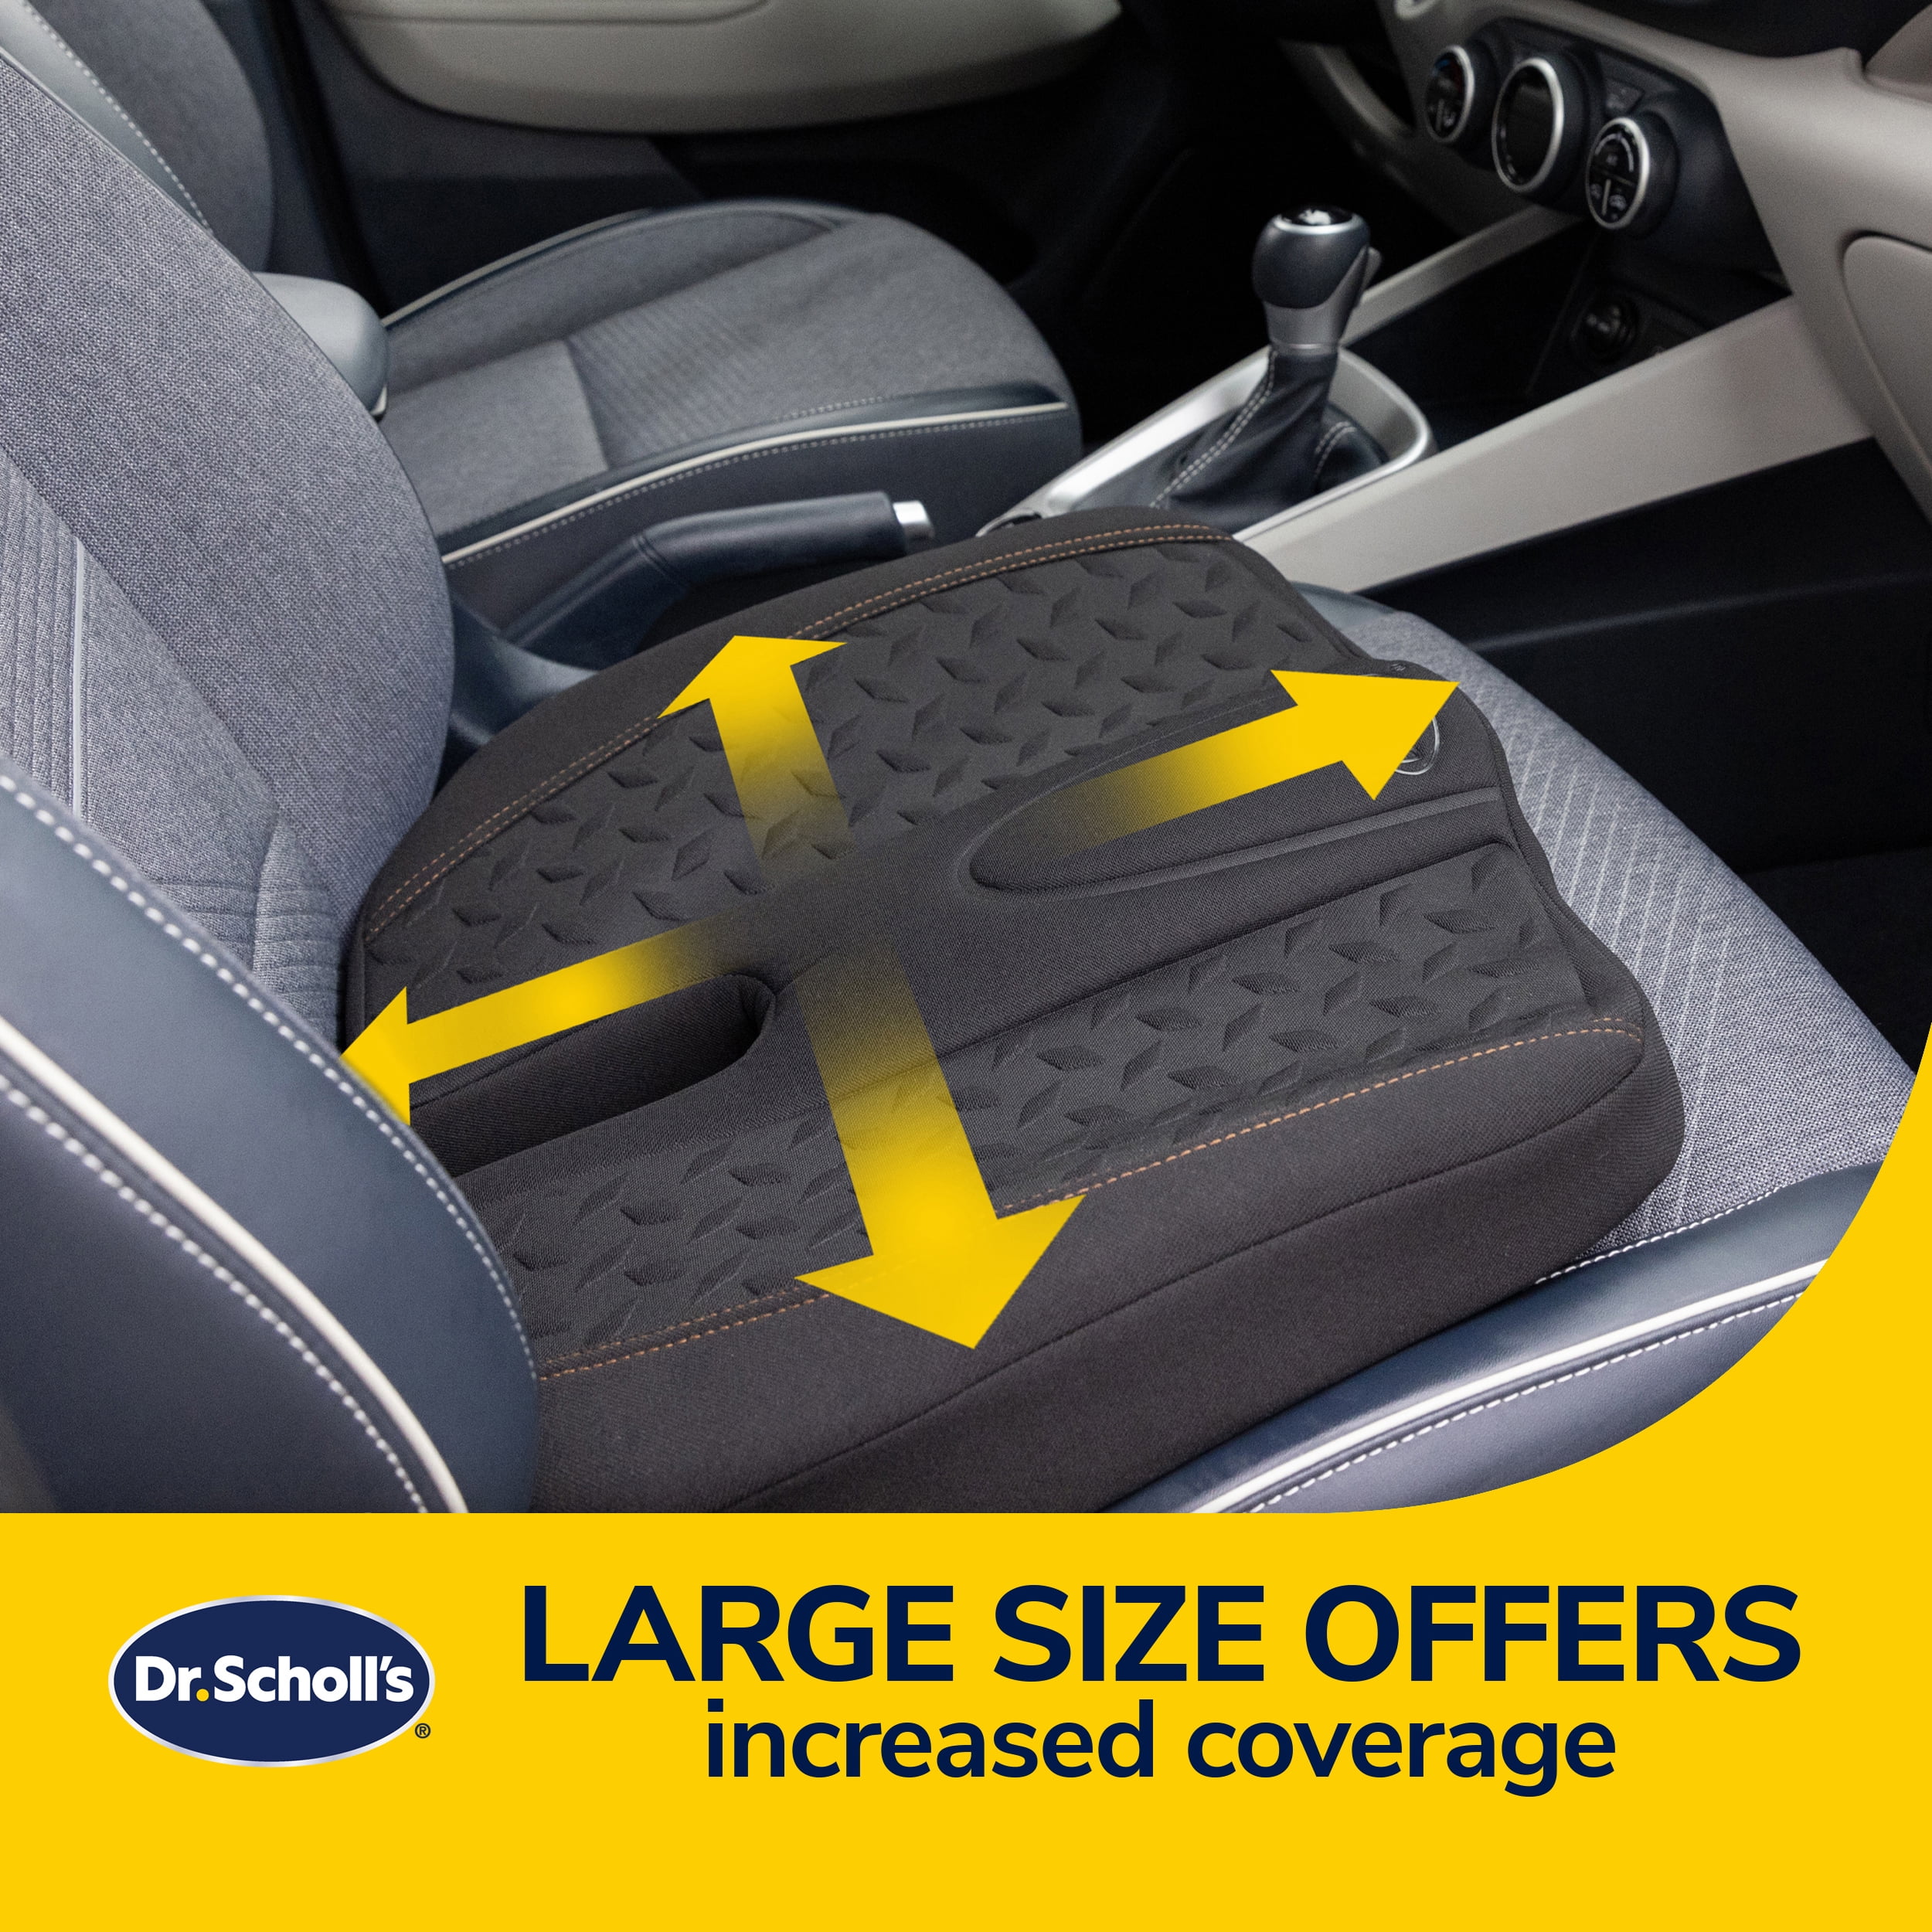 Custom Accessories Dr. Scholl's UltraCool Gel-Infused Posterior Seat Cushion for Car, Truck, SUV - Anti-Slip Backing and Memory Foam for Ergonomic Support and Back